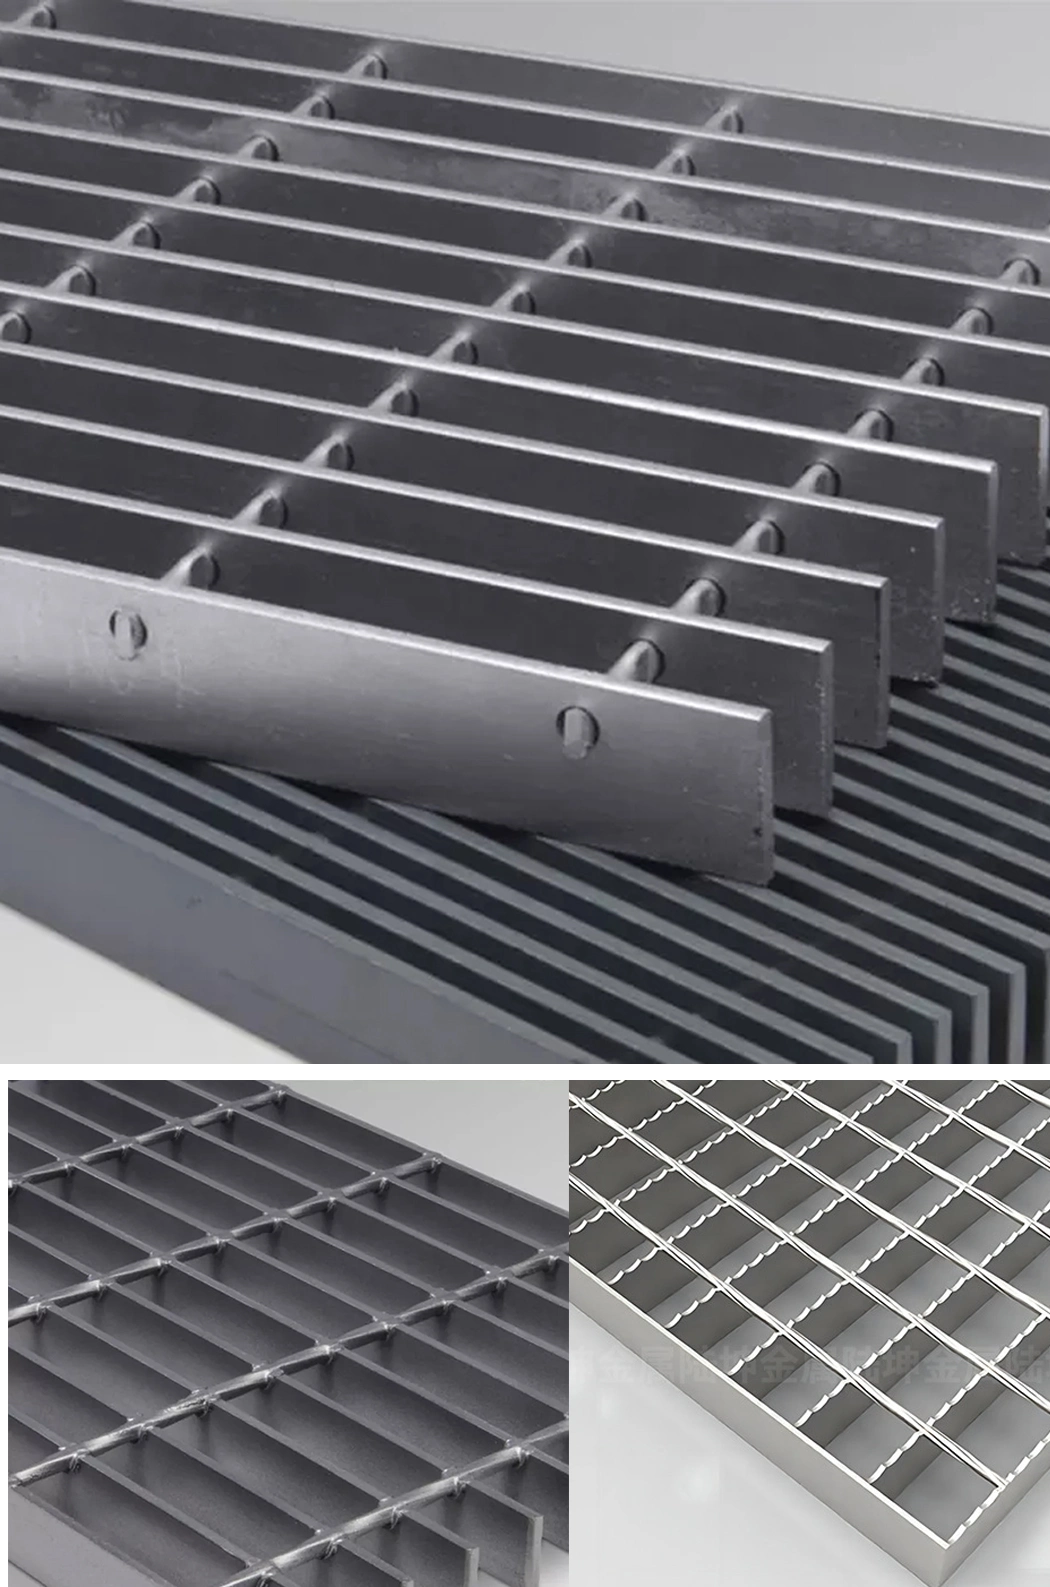 Steel Grid Flooring Hot Dipped Galvanized Metal Grate Trench Steel Walkway Drainage Gratings Steel Grating Canal Cover